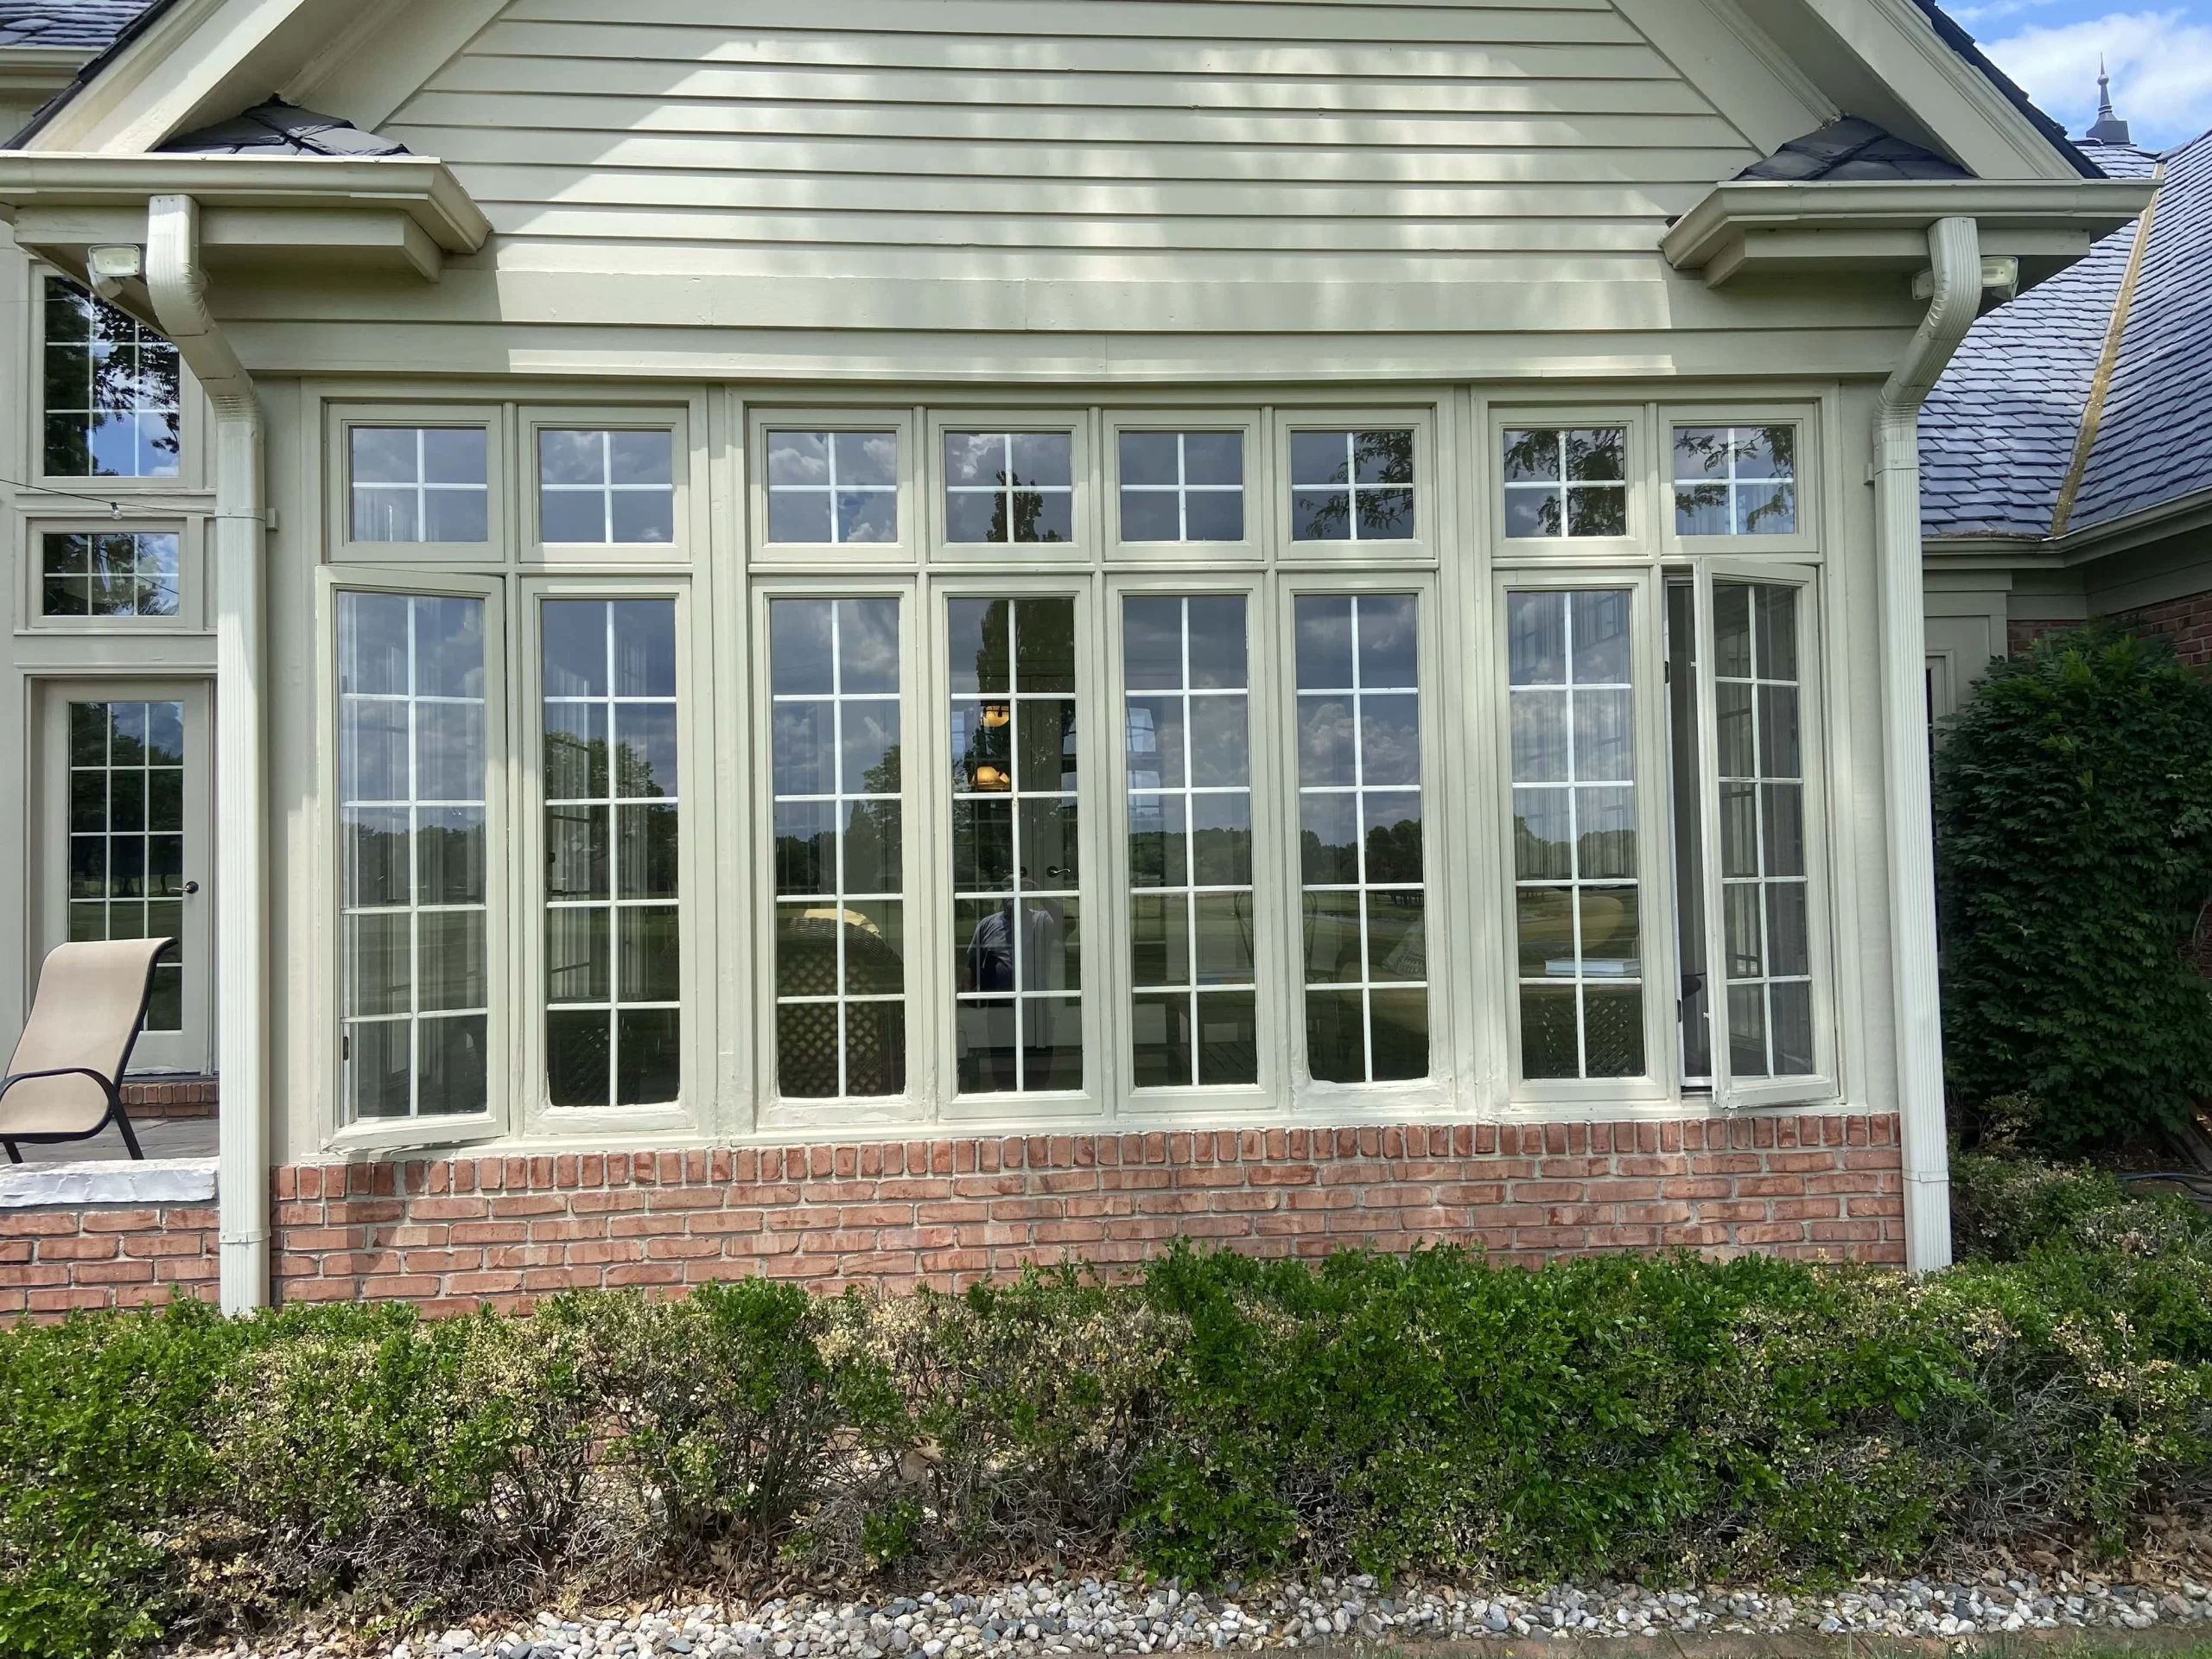 Rotten Wood Window Frame Repair and Restoration in Naperville, IL